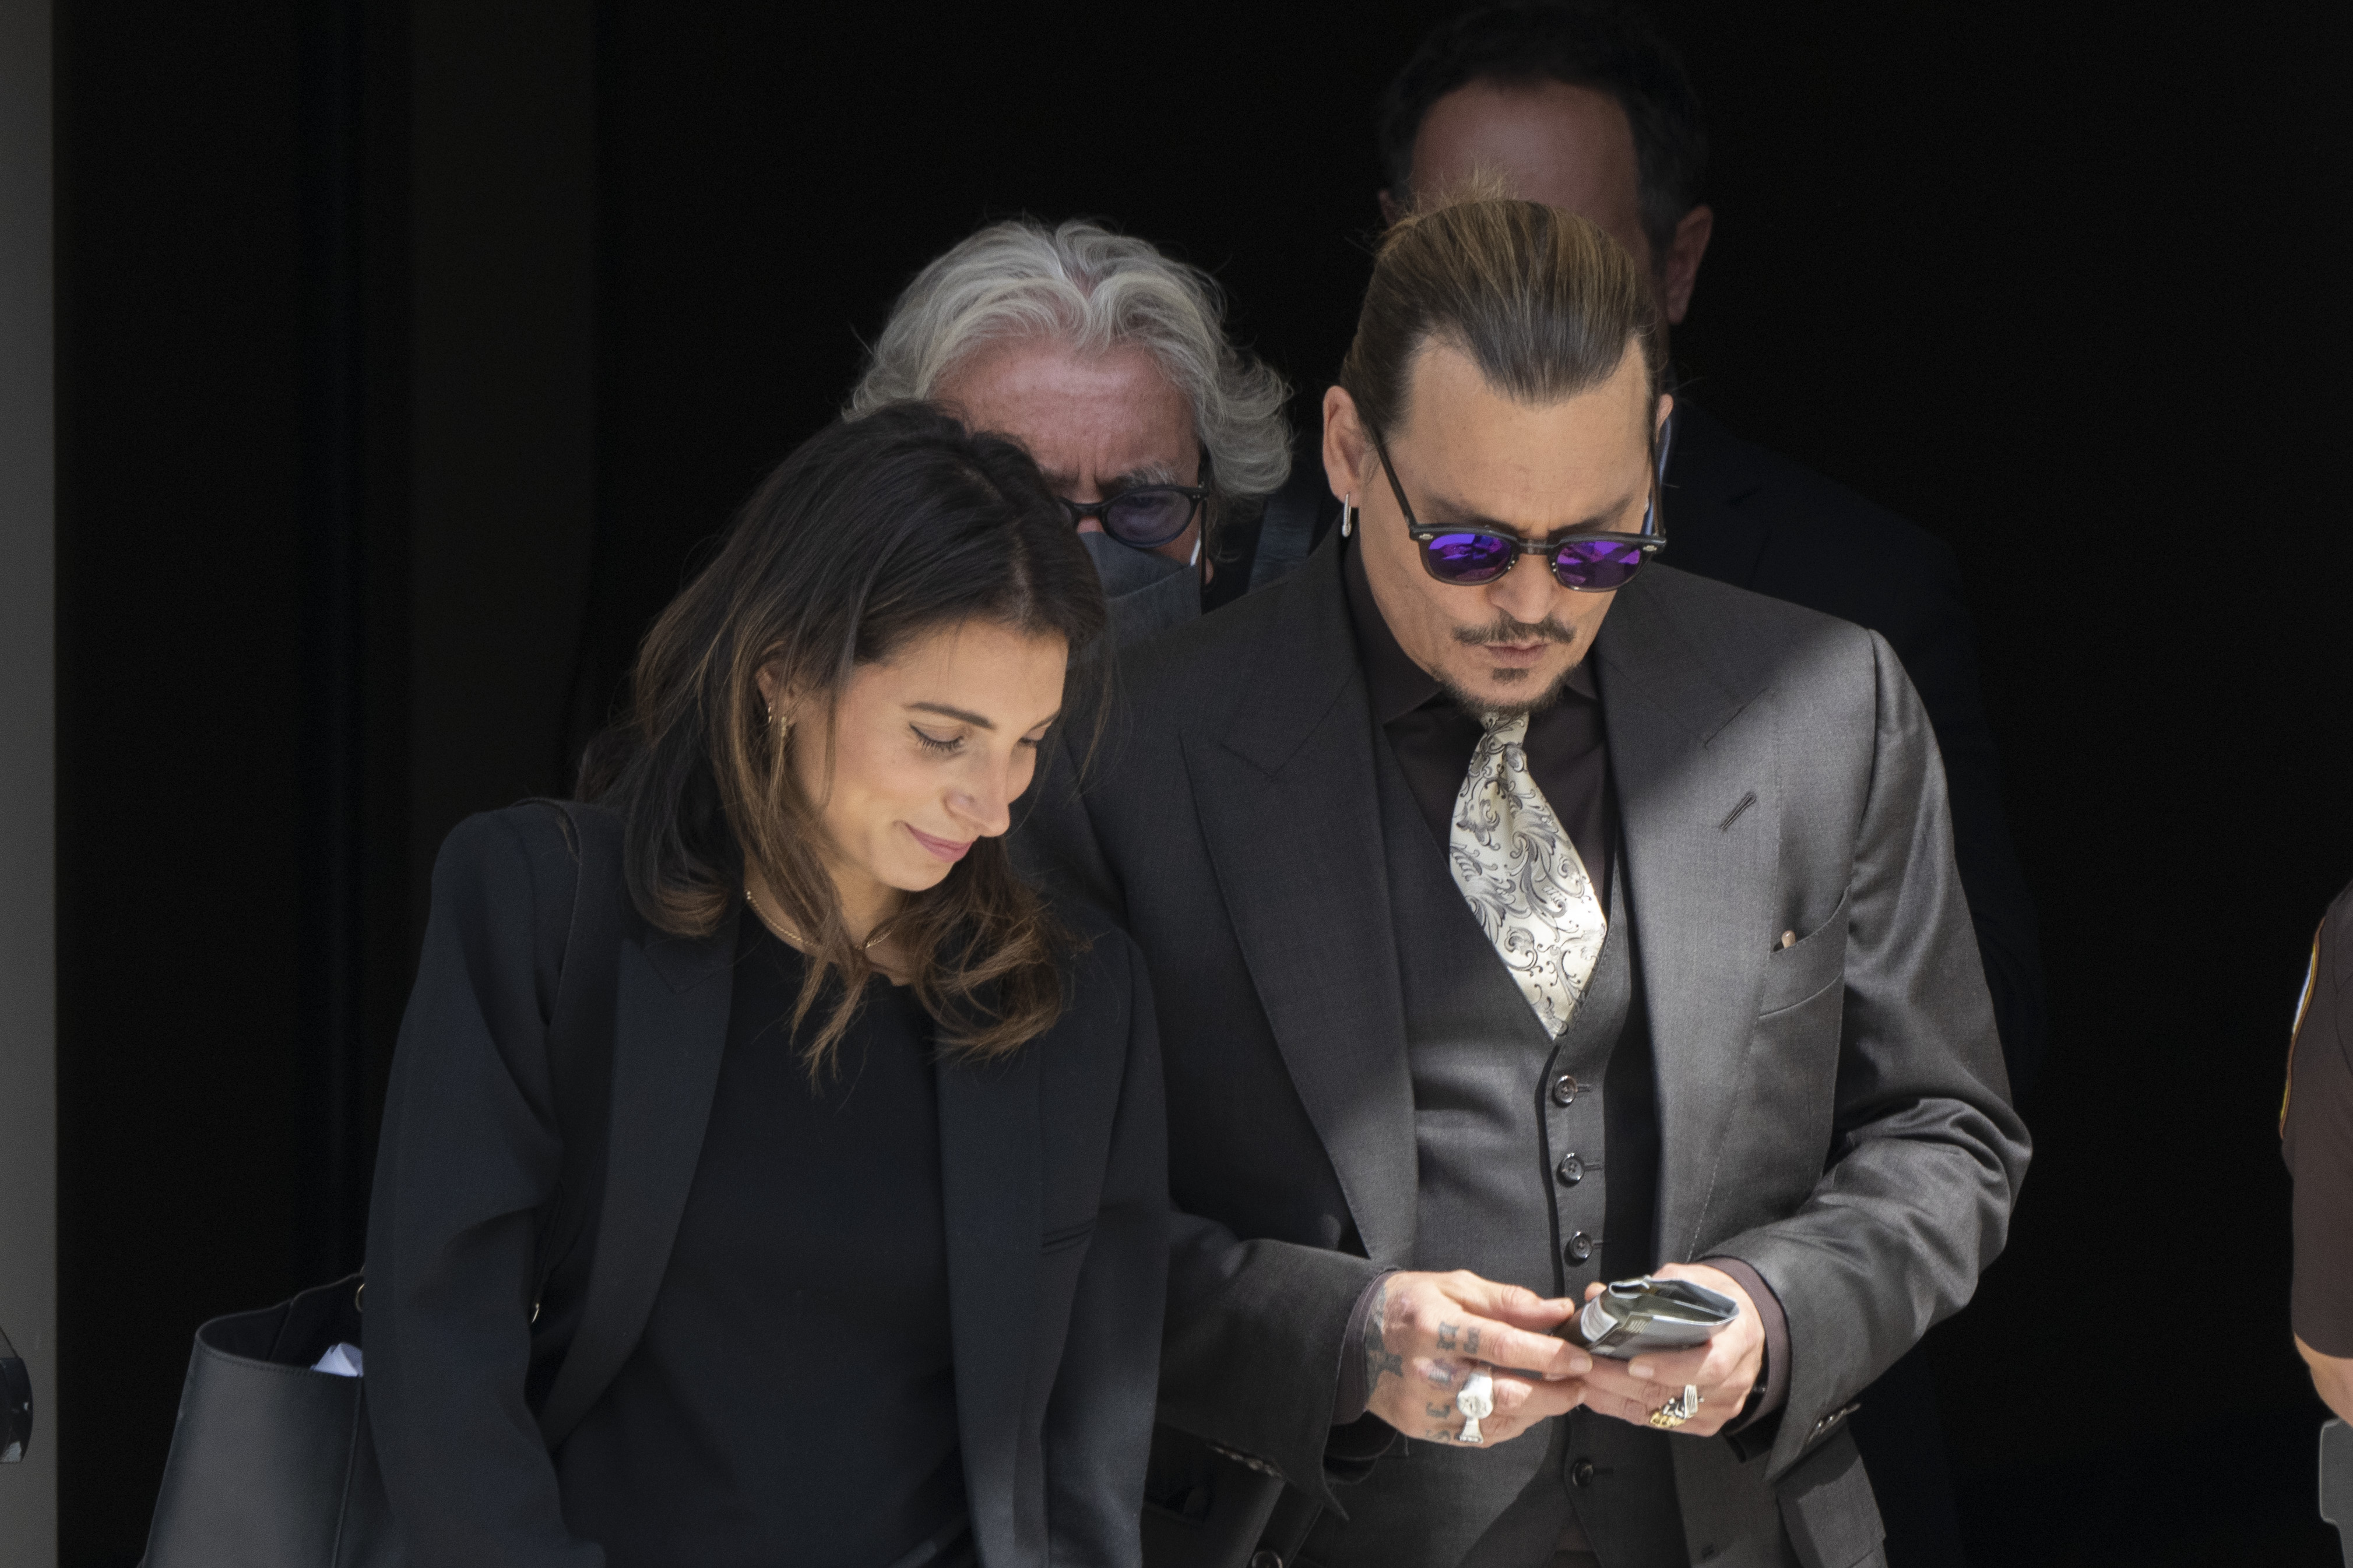 Joelle Rich and Johnny Depp outside court at Fairfax County Circuit Court on May 23, 2022 in Fairfax, Virginia | Source: Getty Images